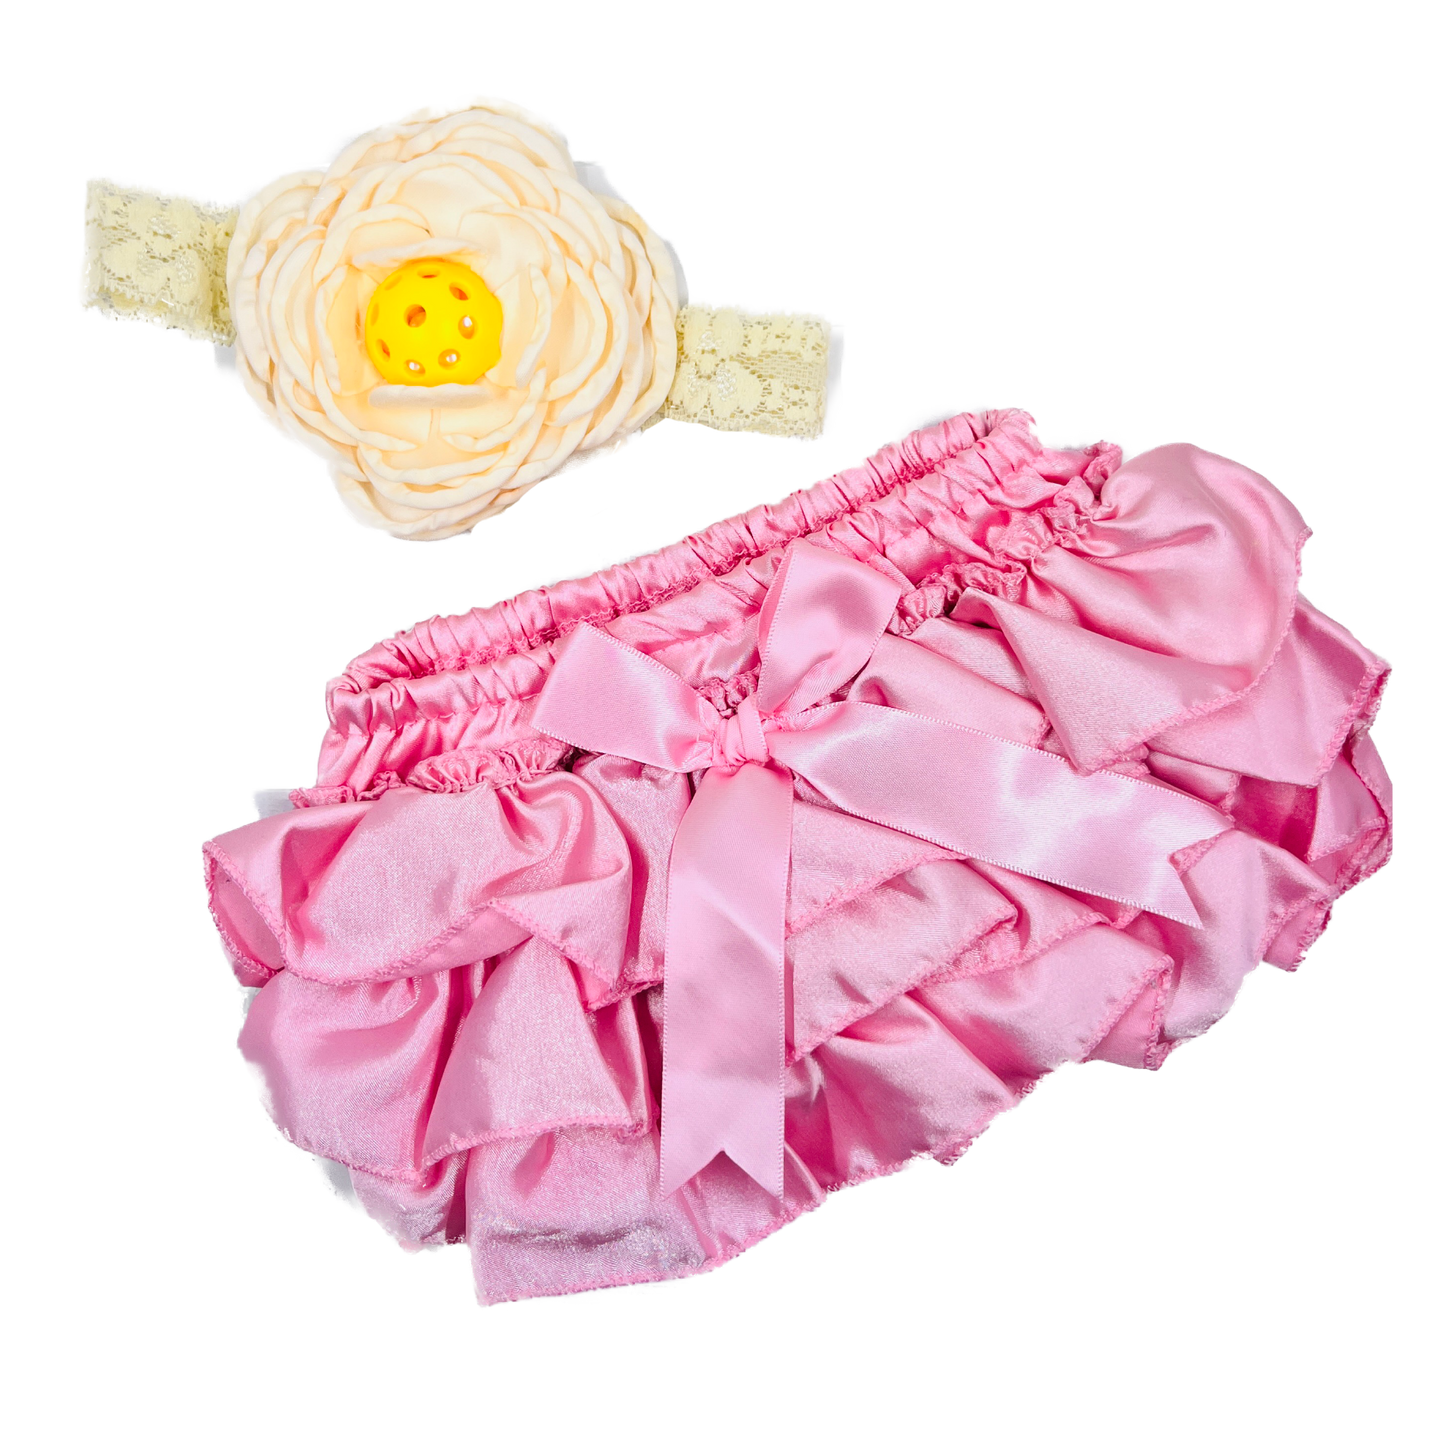 Pickleball Baby Headband and Bloomer set - Infant Pickleball Gift  Super cute infant bloomer with Pickleball headband. These come in limited colors, and styles, so don't miss your opportunity to give this perfect gift!!